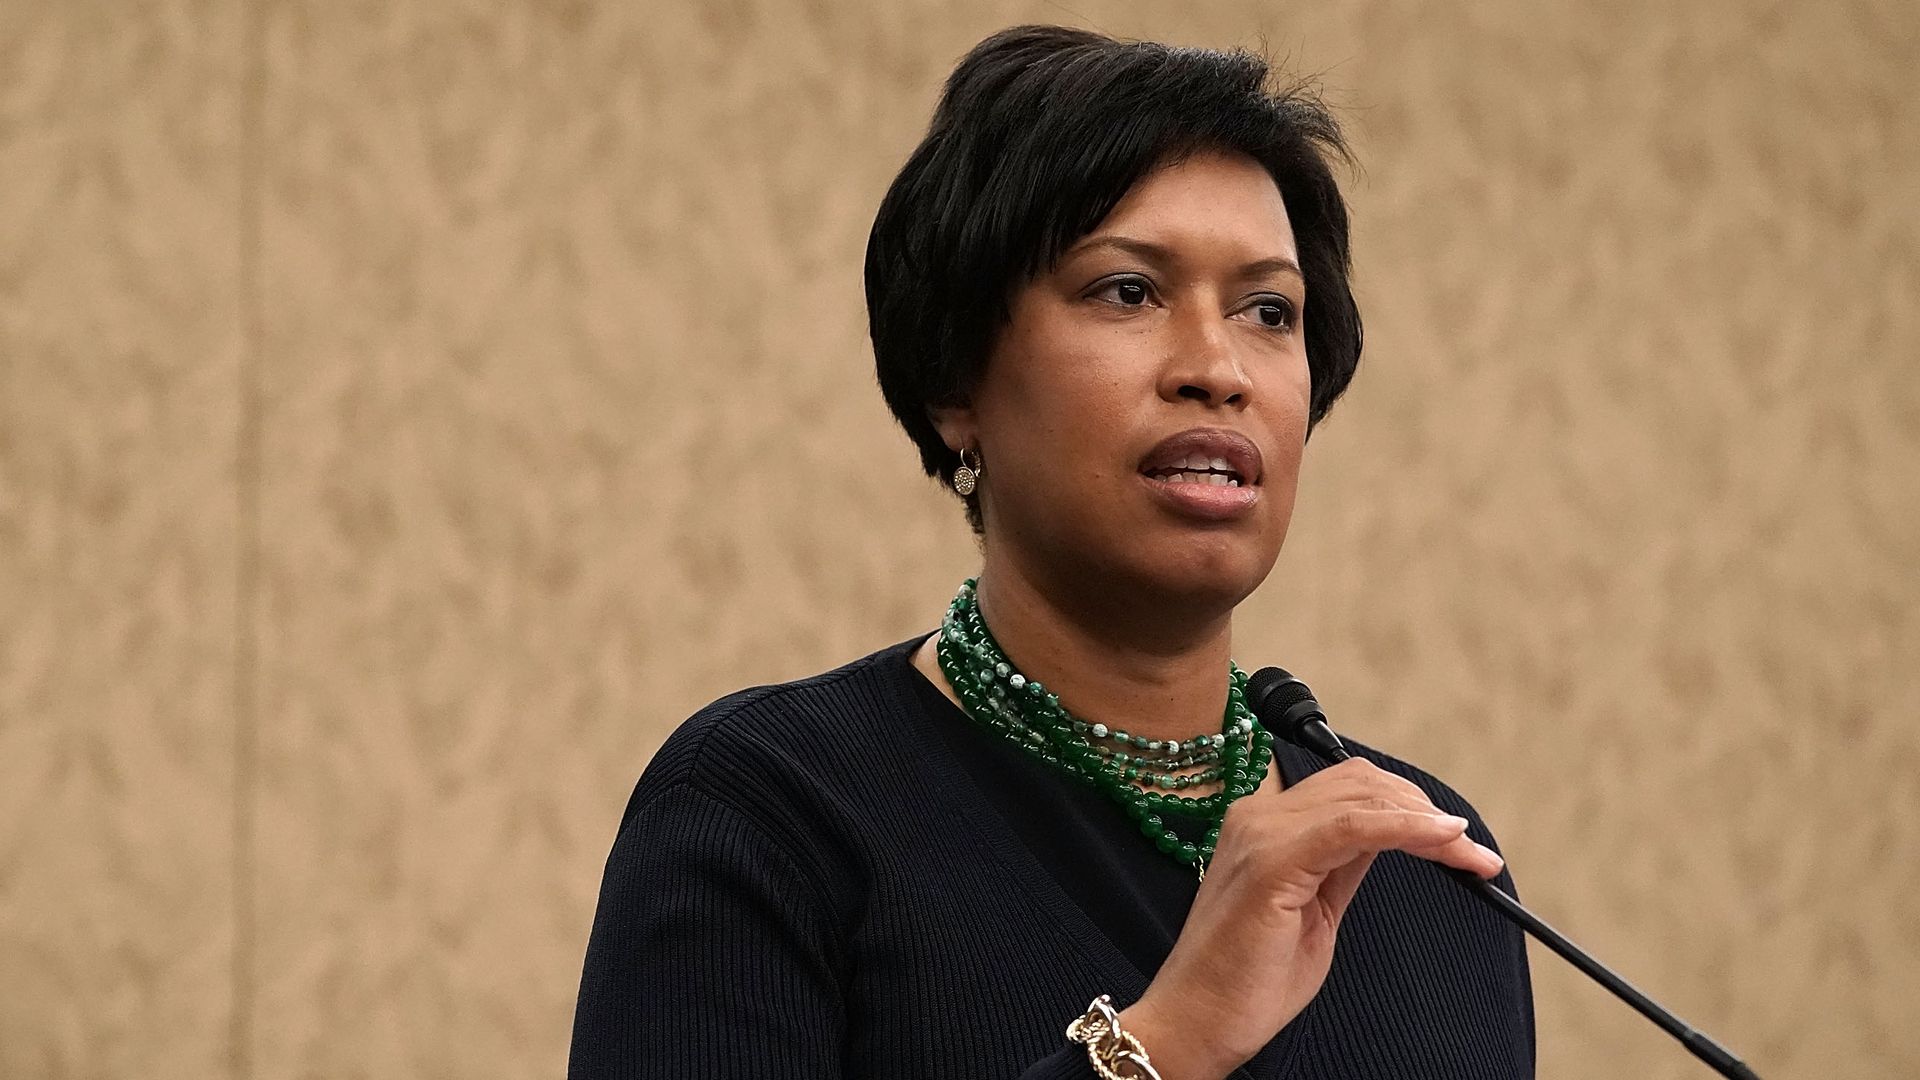 Mayor Muriel Bowser speaks into a microphone at a podium